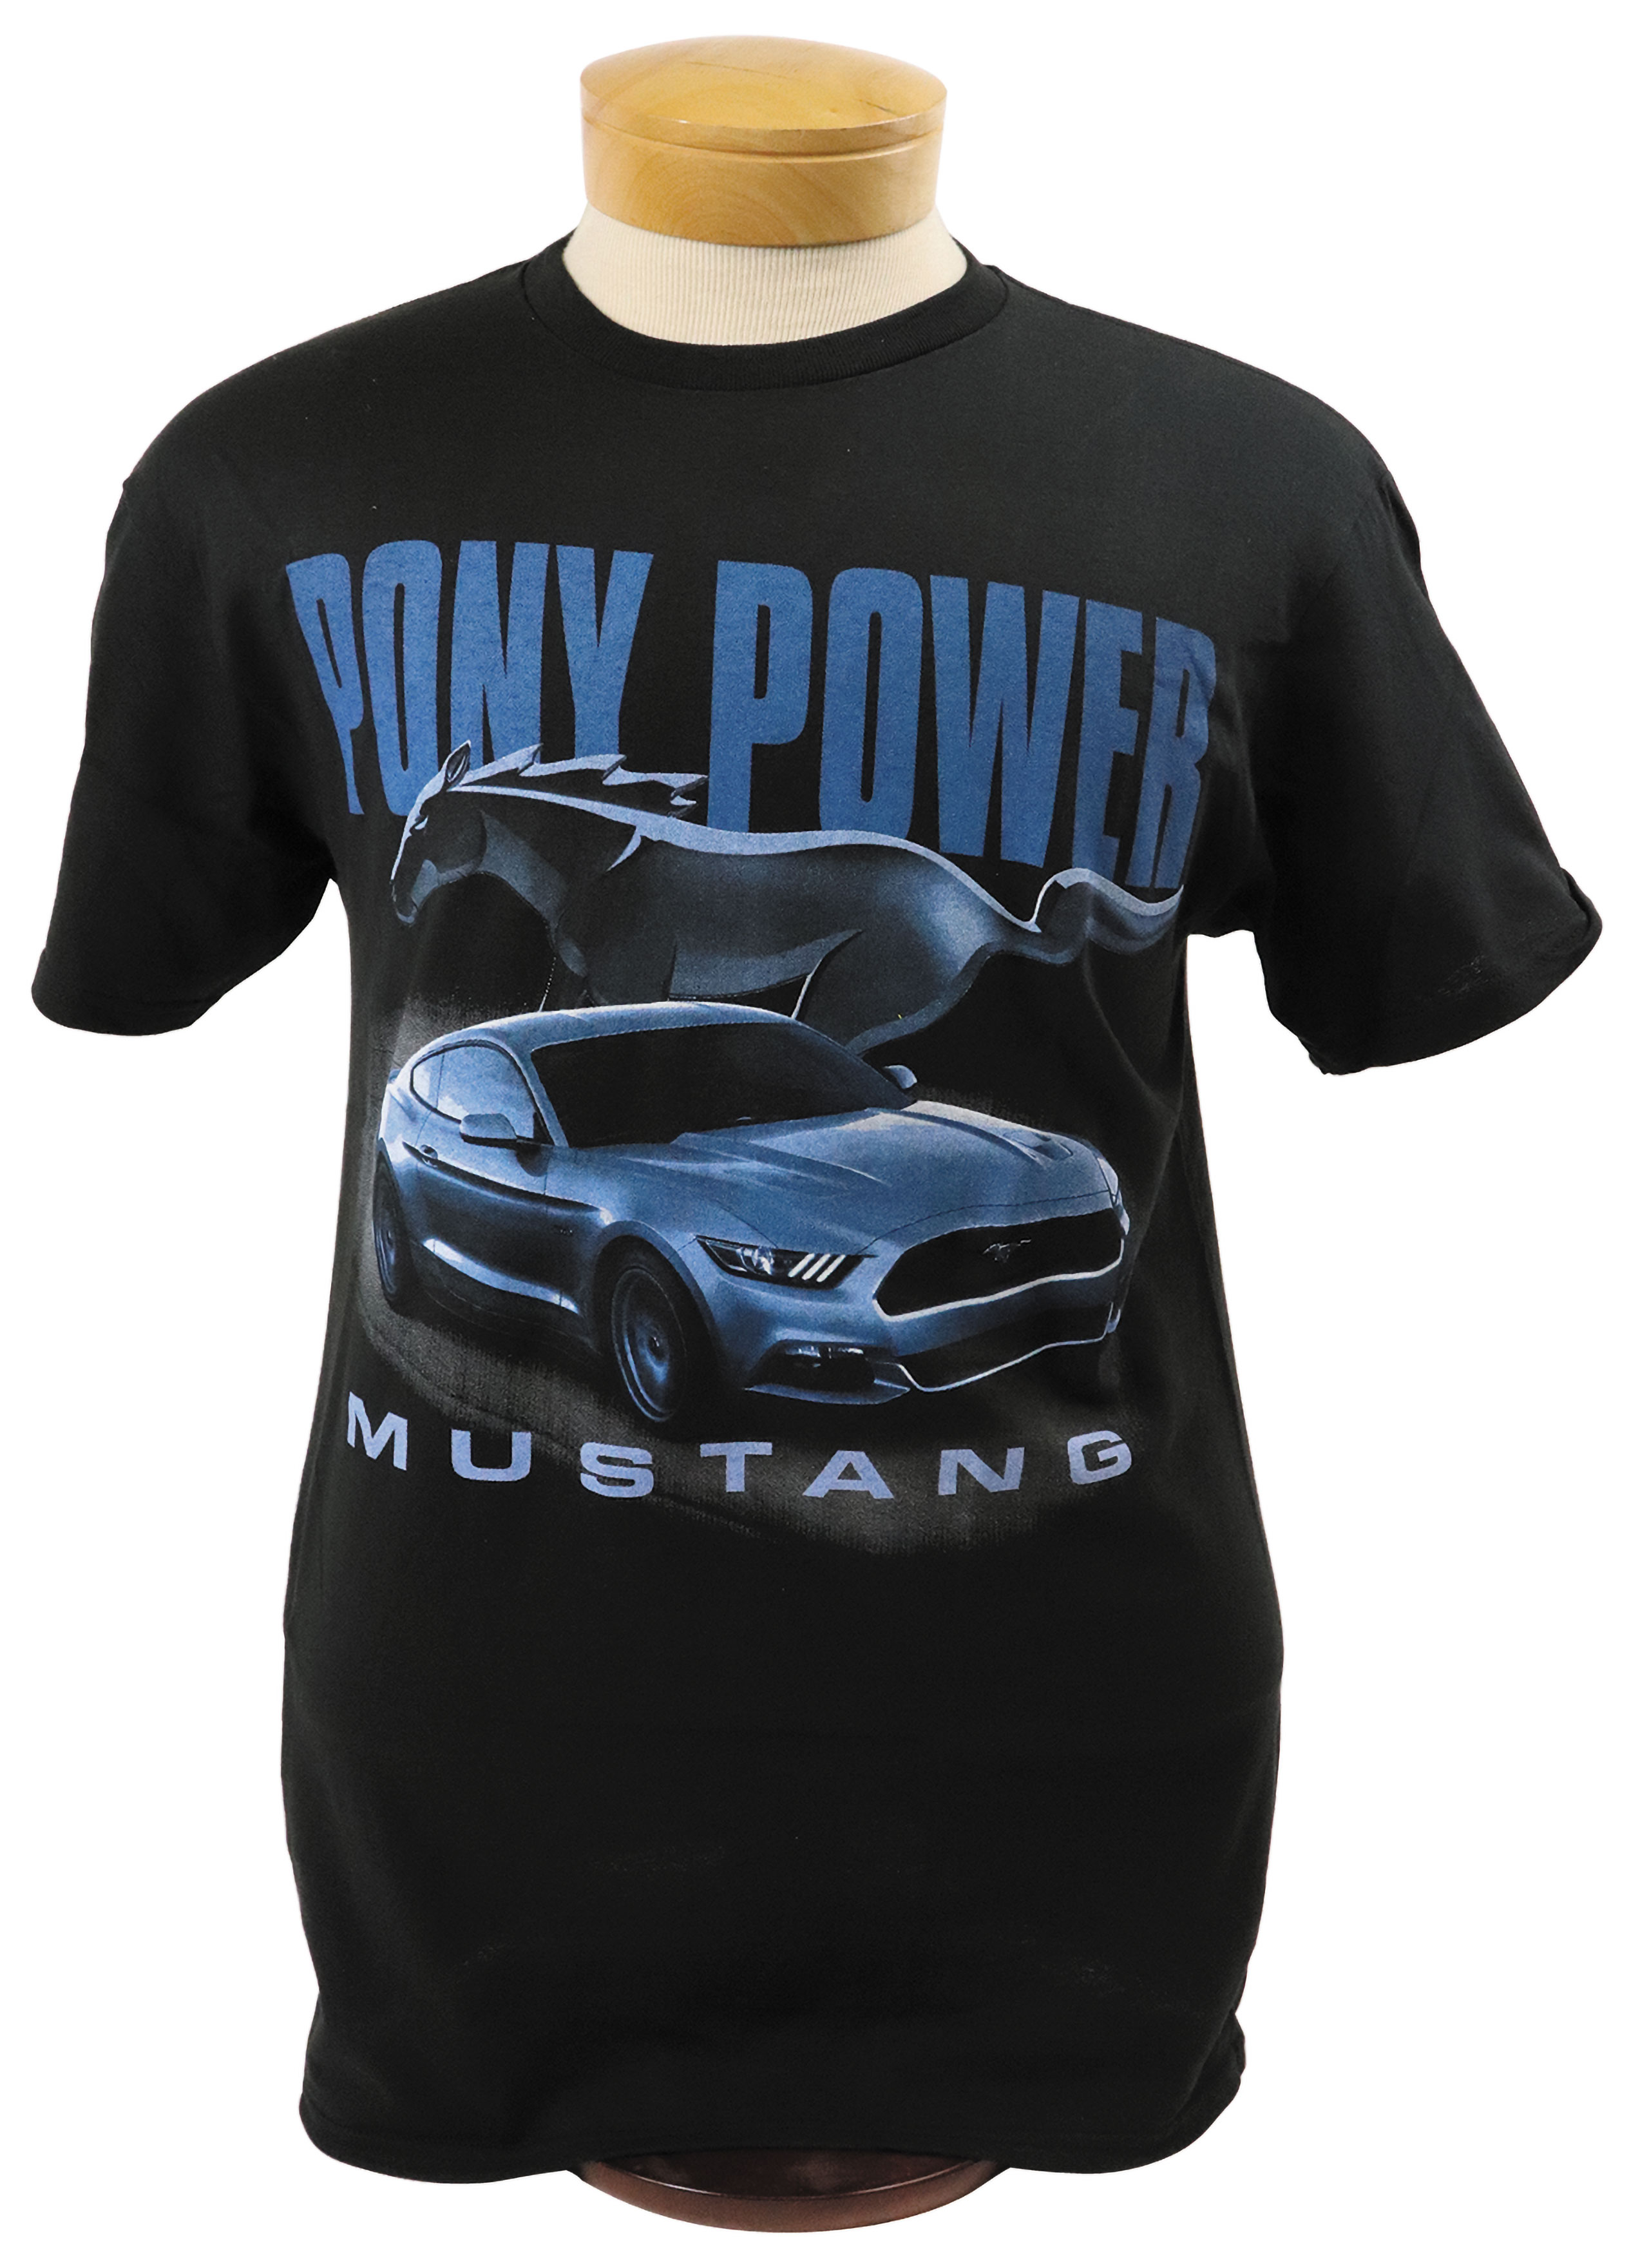 1964-2021 Ford Mustang T-Shirt - Mustang Pony Power - Black - Large - Auto Accessories of America